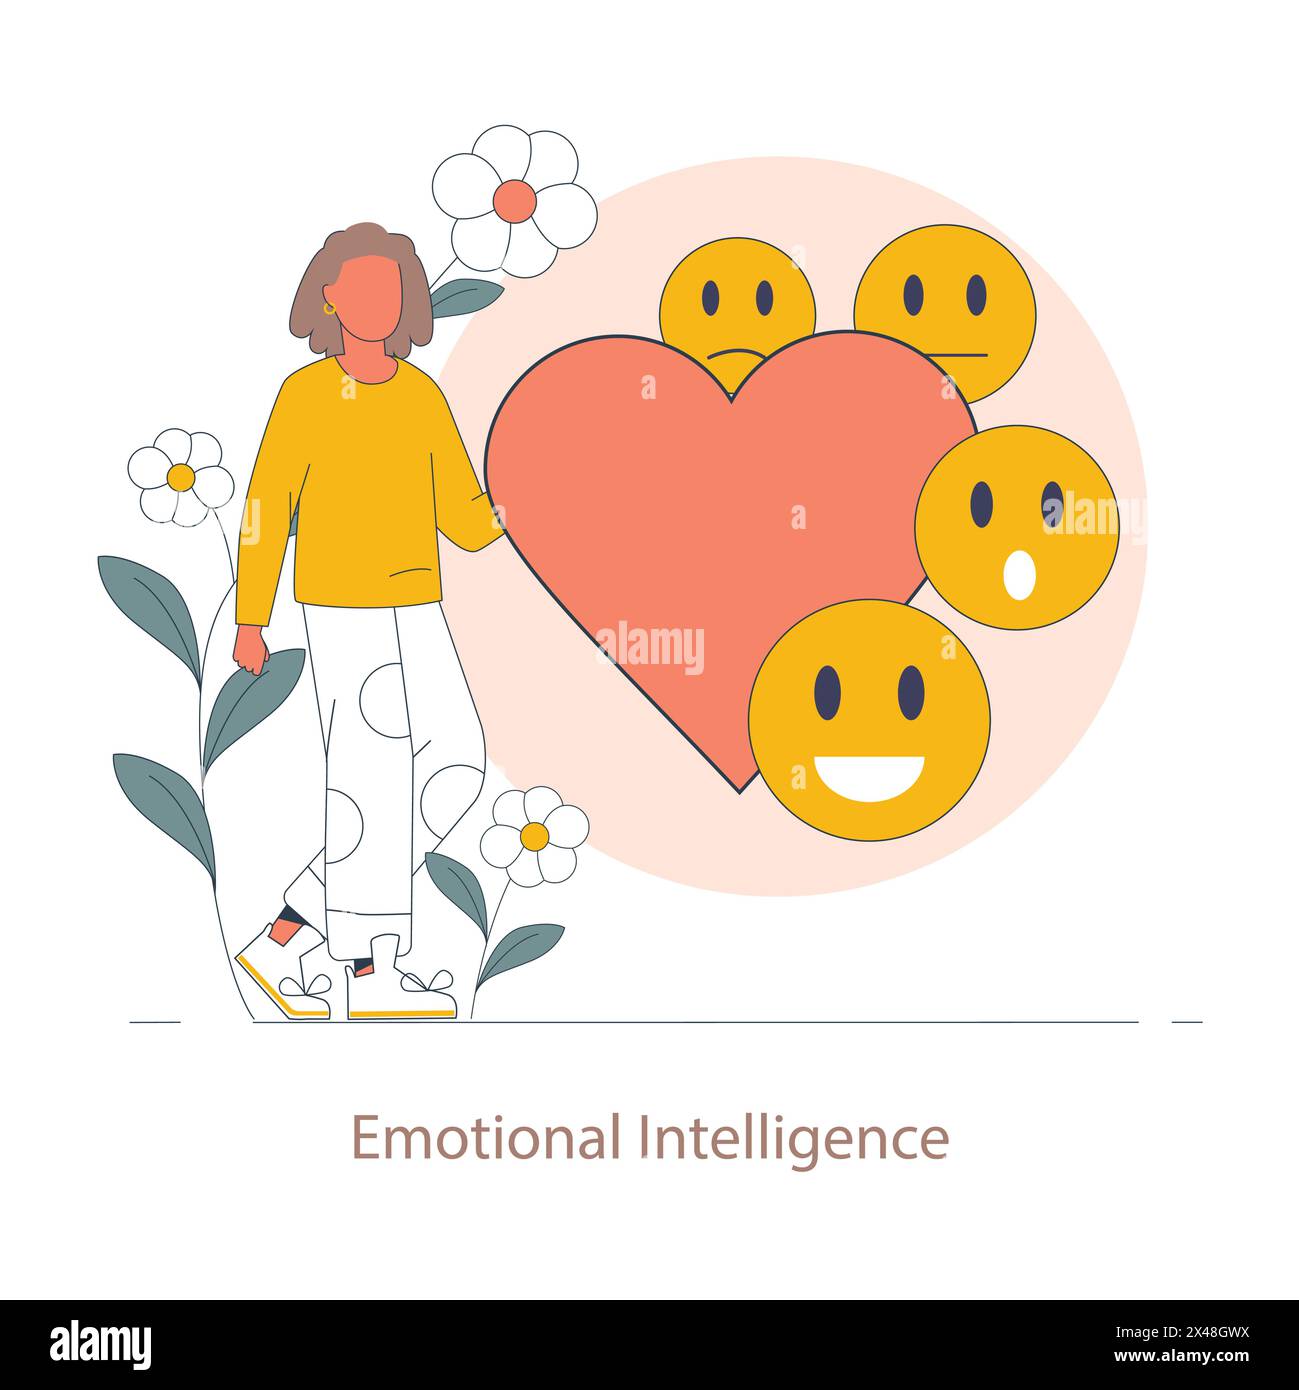 Emotional Intelligence concept. An evocative illustration that delves into emotional intelligence, exploring emotion management and the power of empathy. Vector illustration. Stock Vector